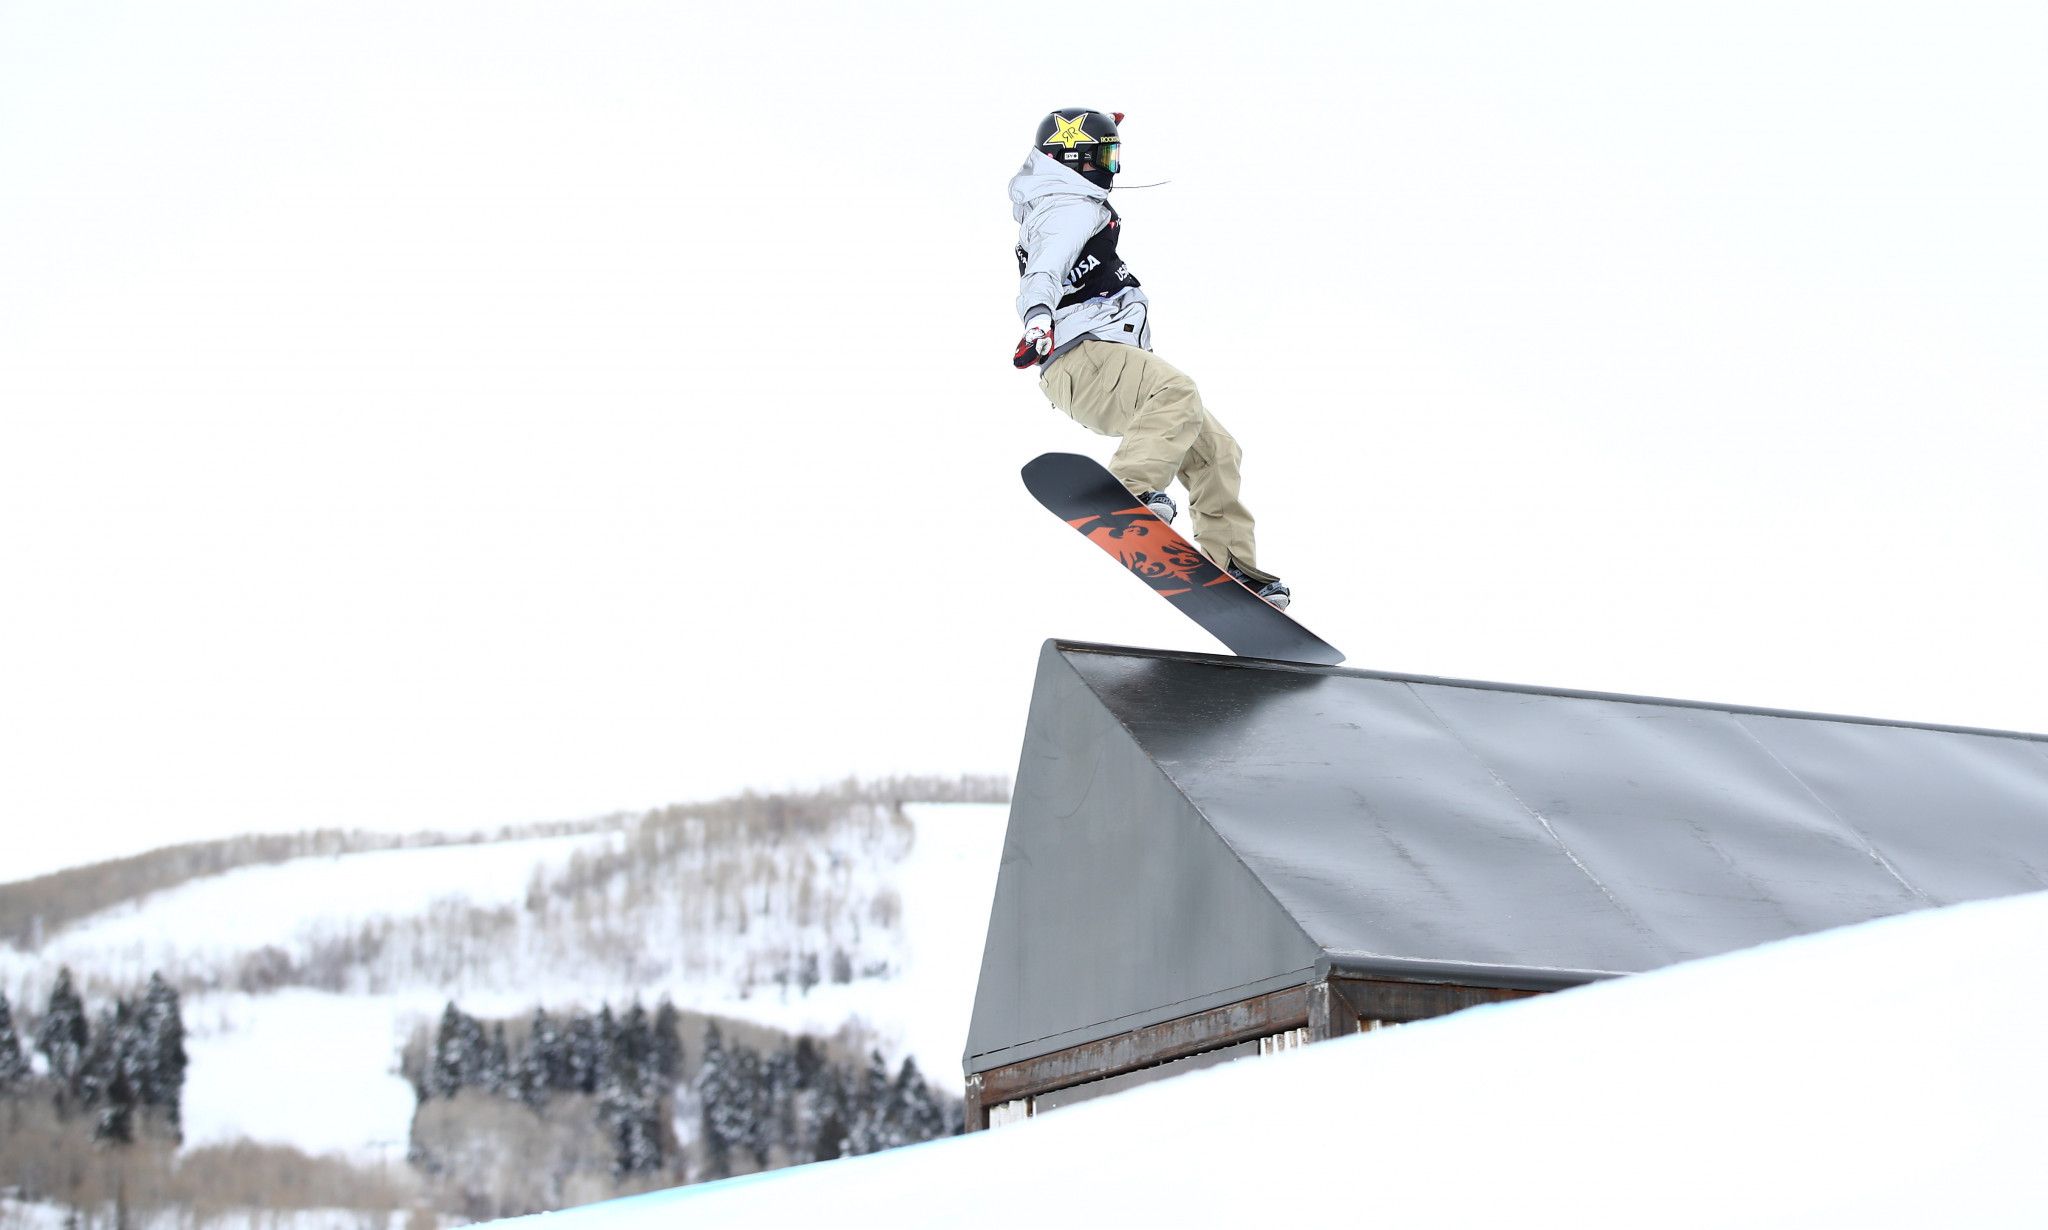 The United States' Chris Corning came out on top in the men's snowboard slopestyle event ©Getty Images